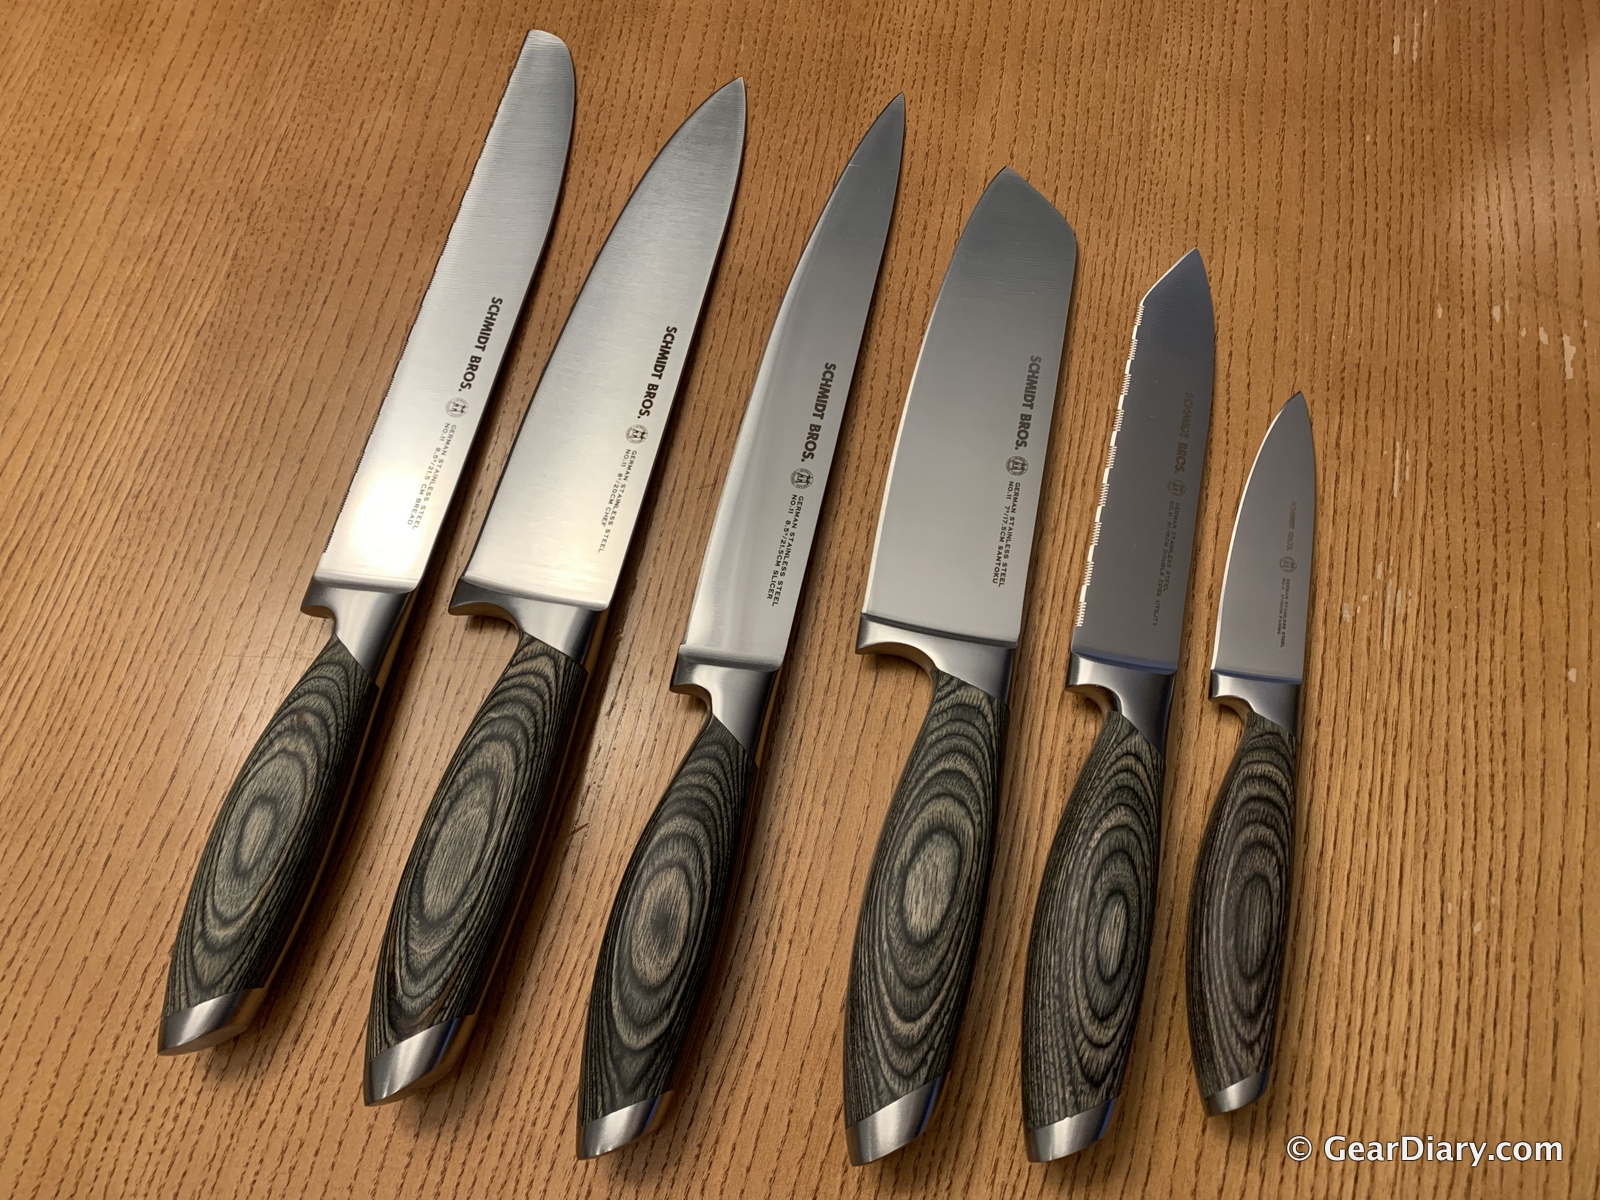 Schmidt Brothers Cutlery Deserves a Turn in your Kitchen | GearDiary